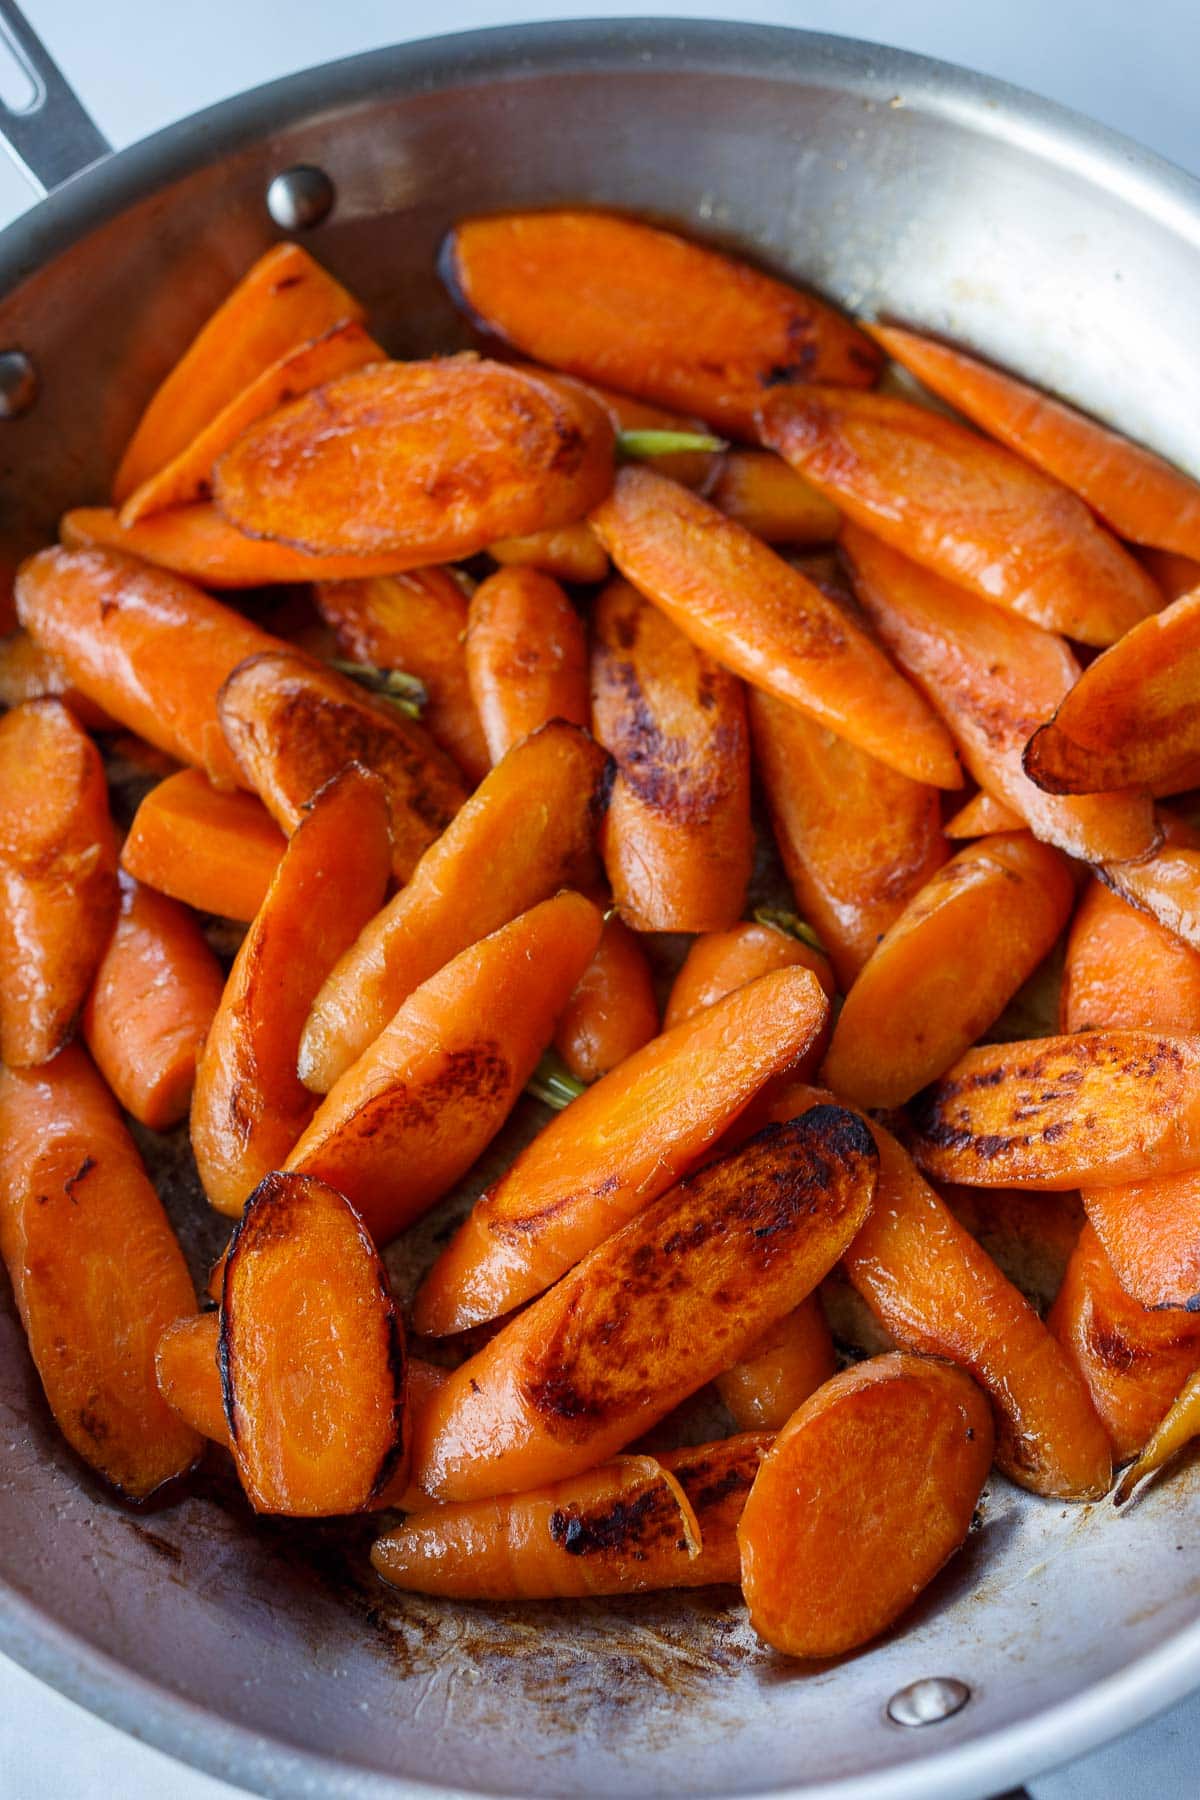 Carrot slices searing in a pan for glazed carrots.